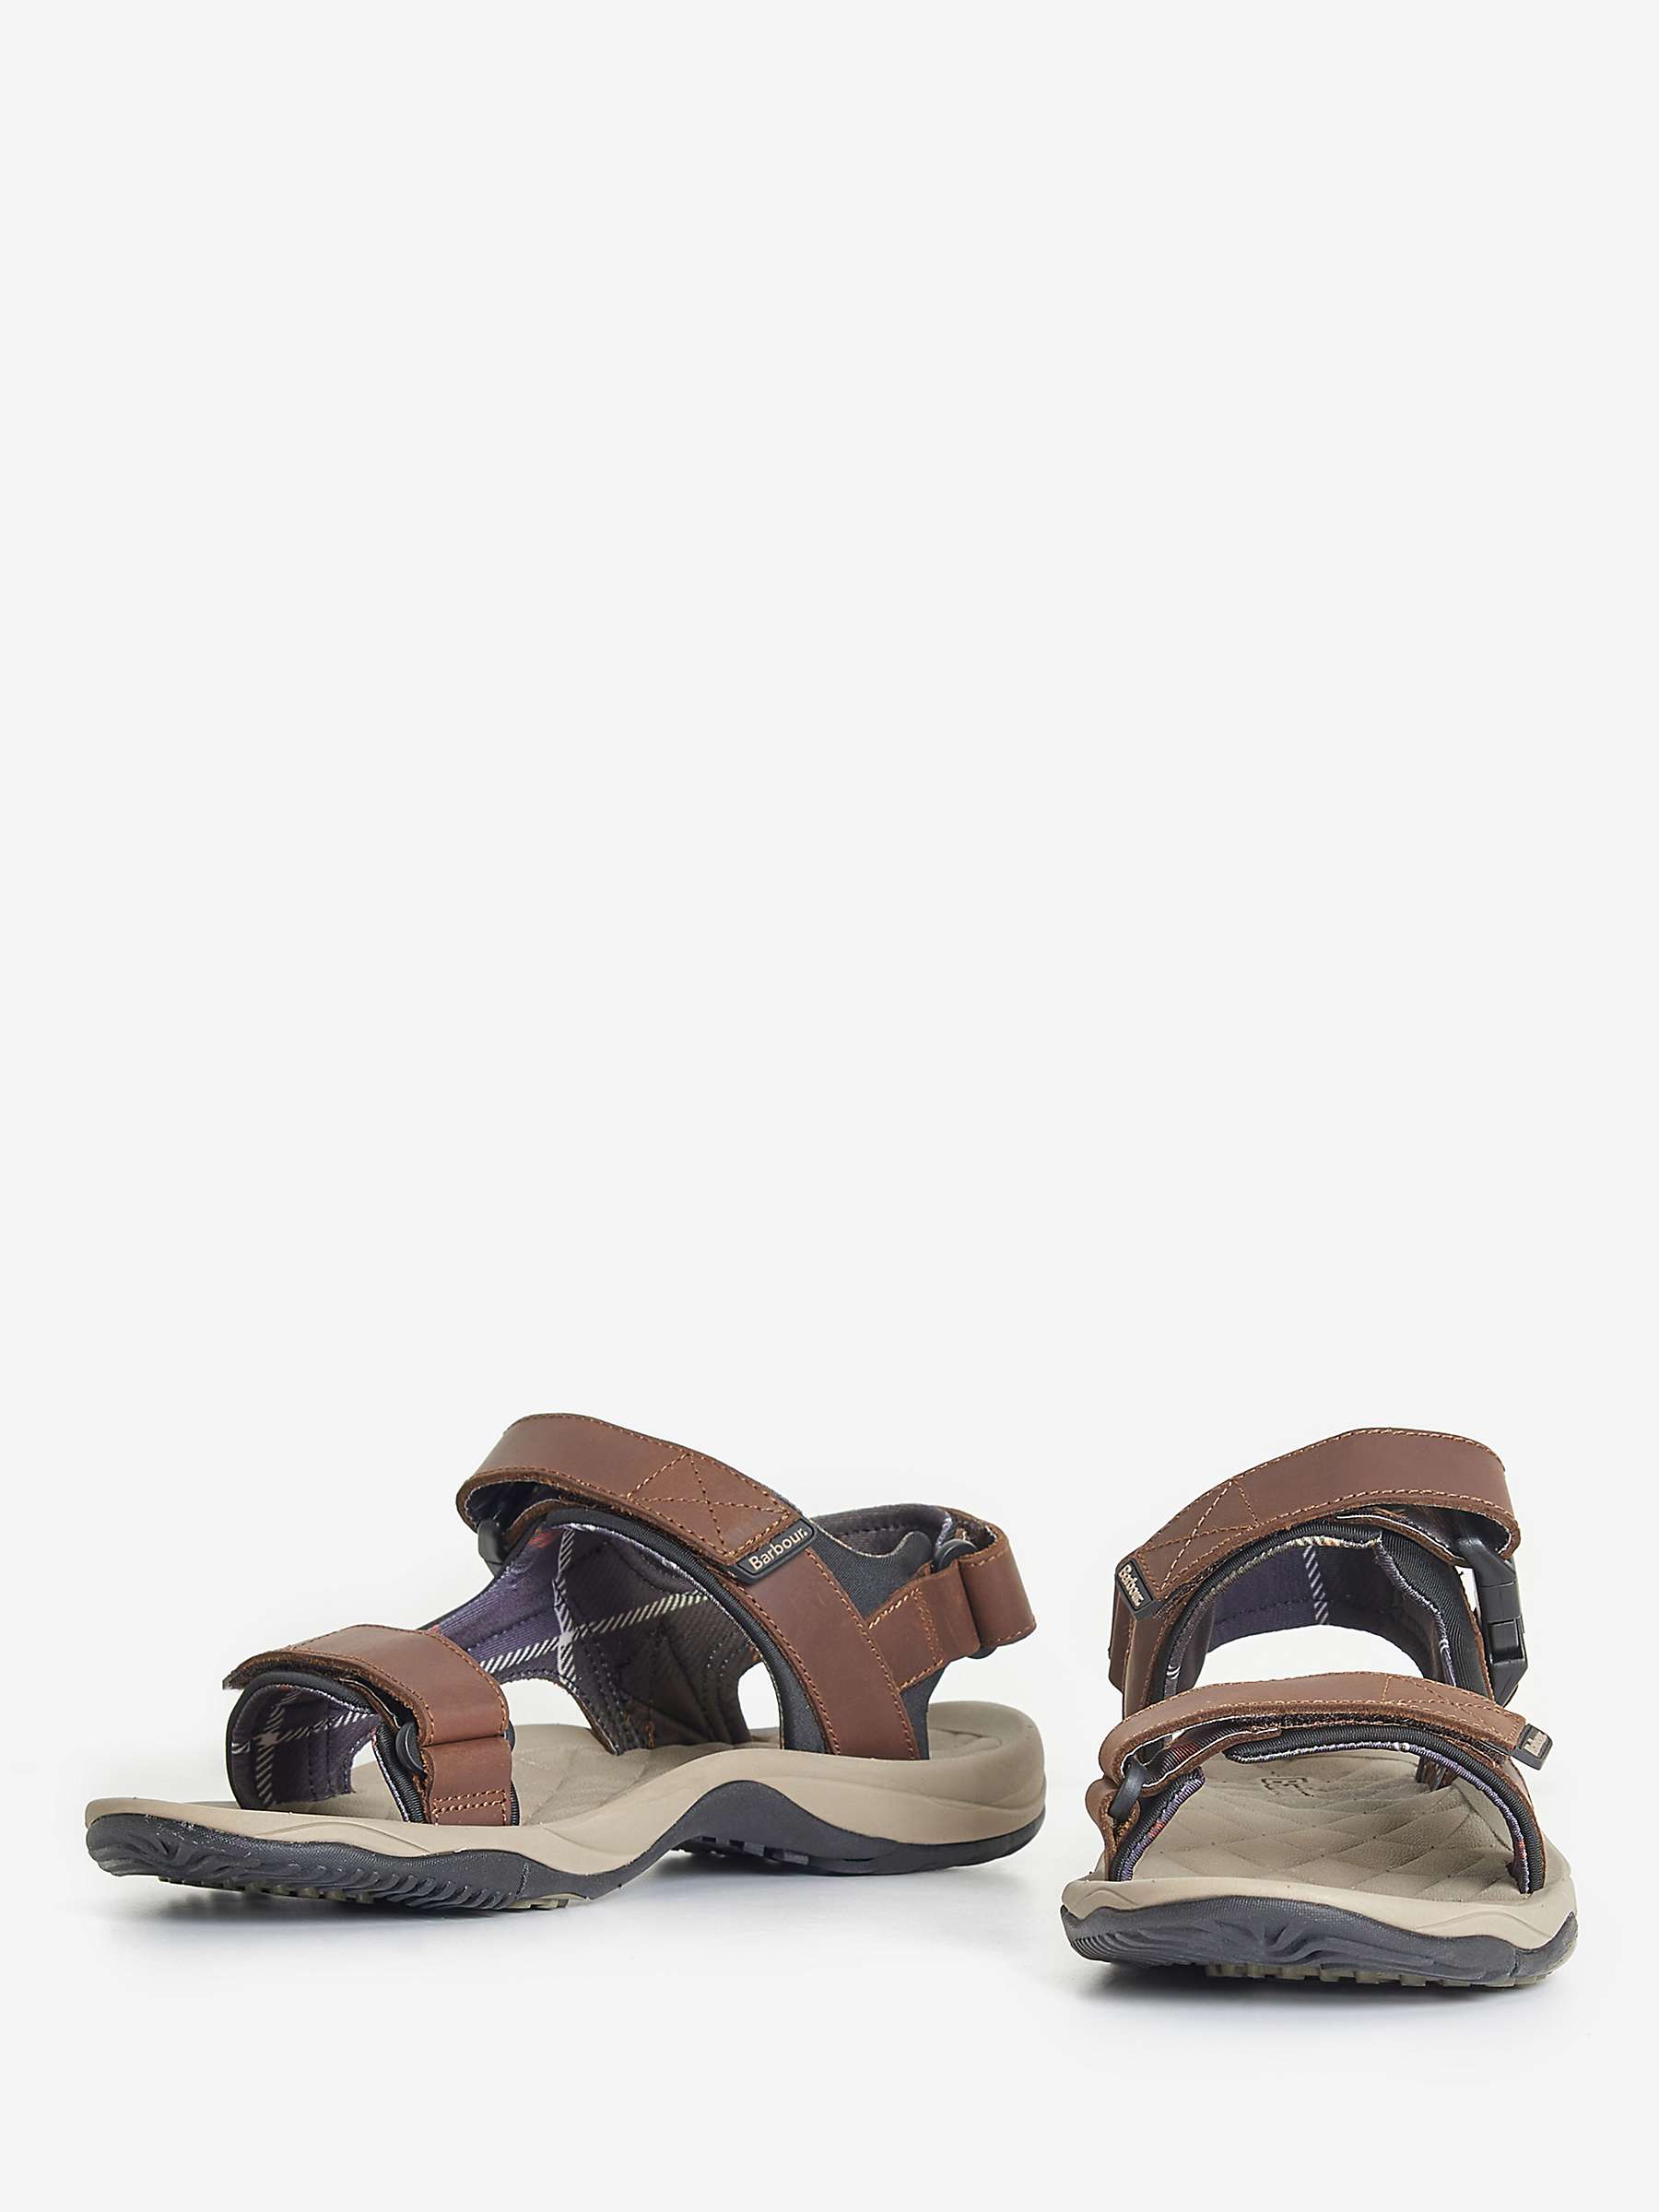 Buy Barbour Pawston Sandals, Brown Online at johnlewis.com